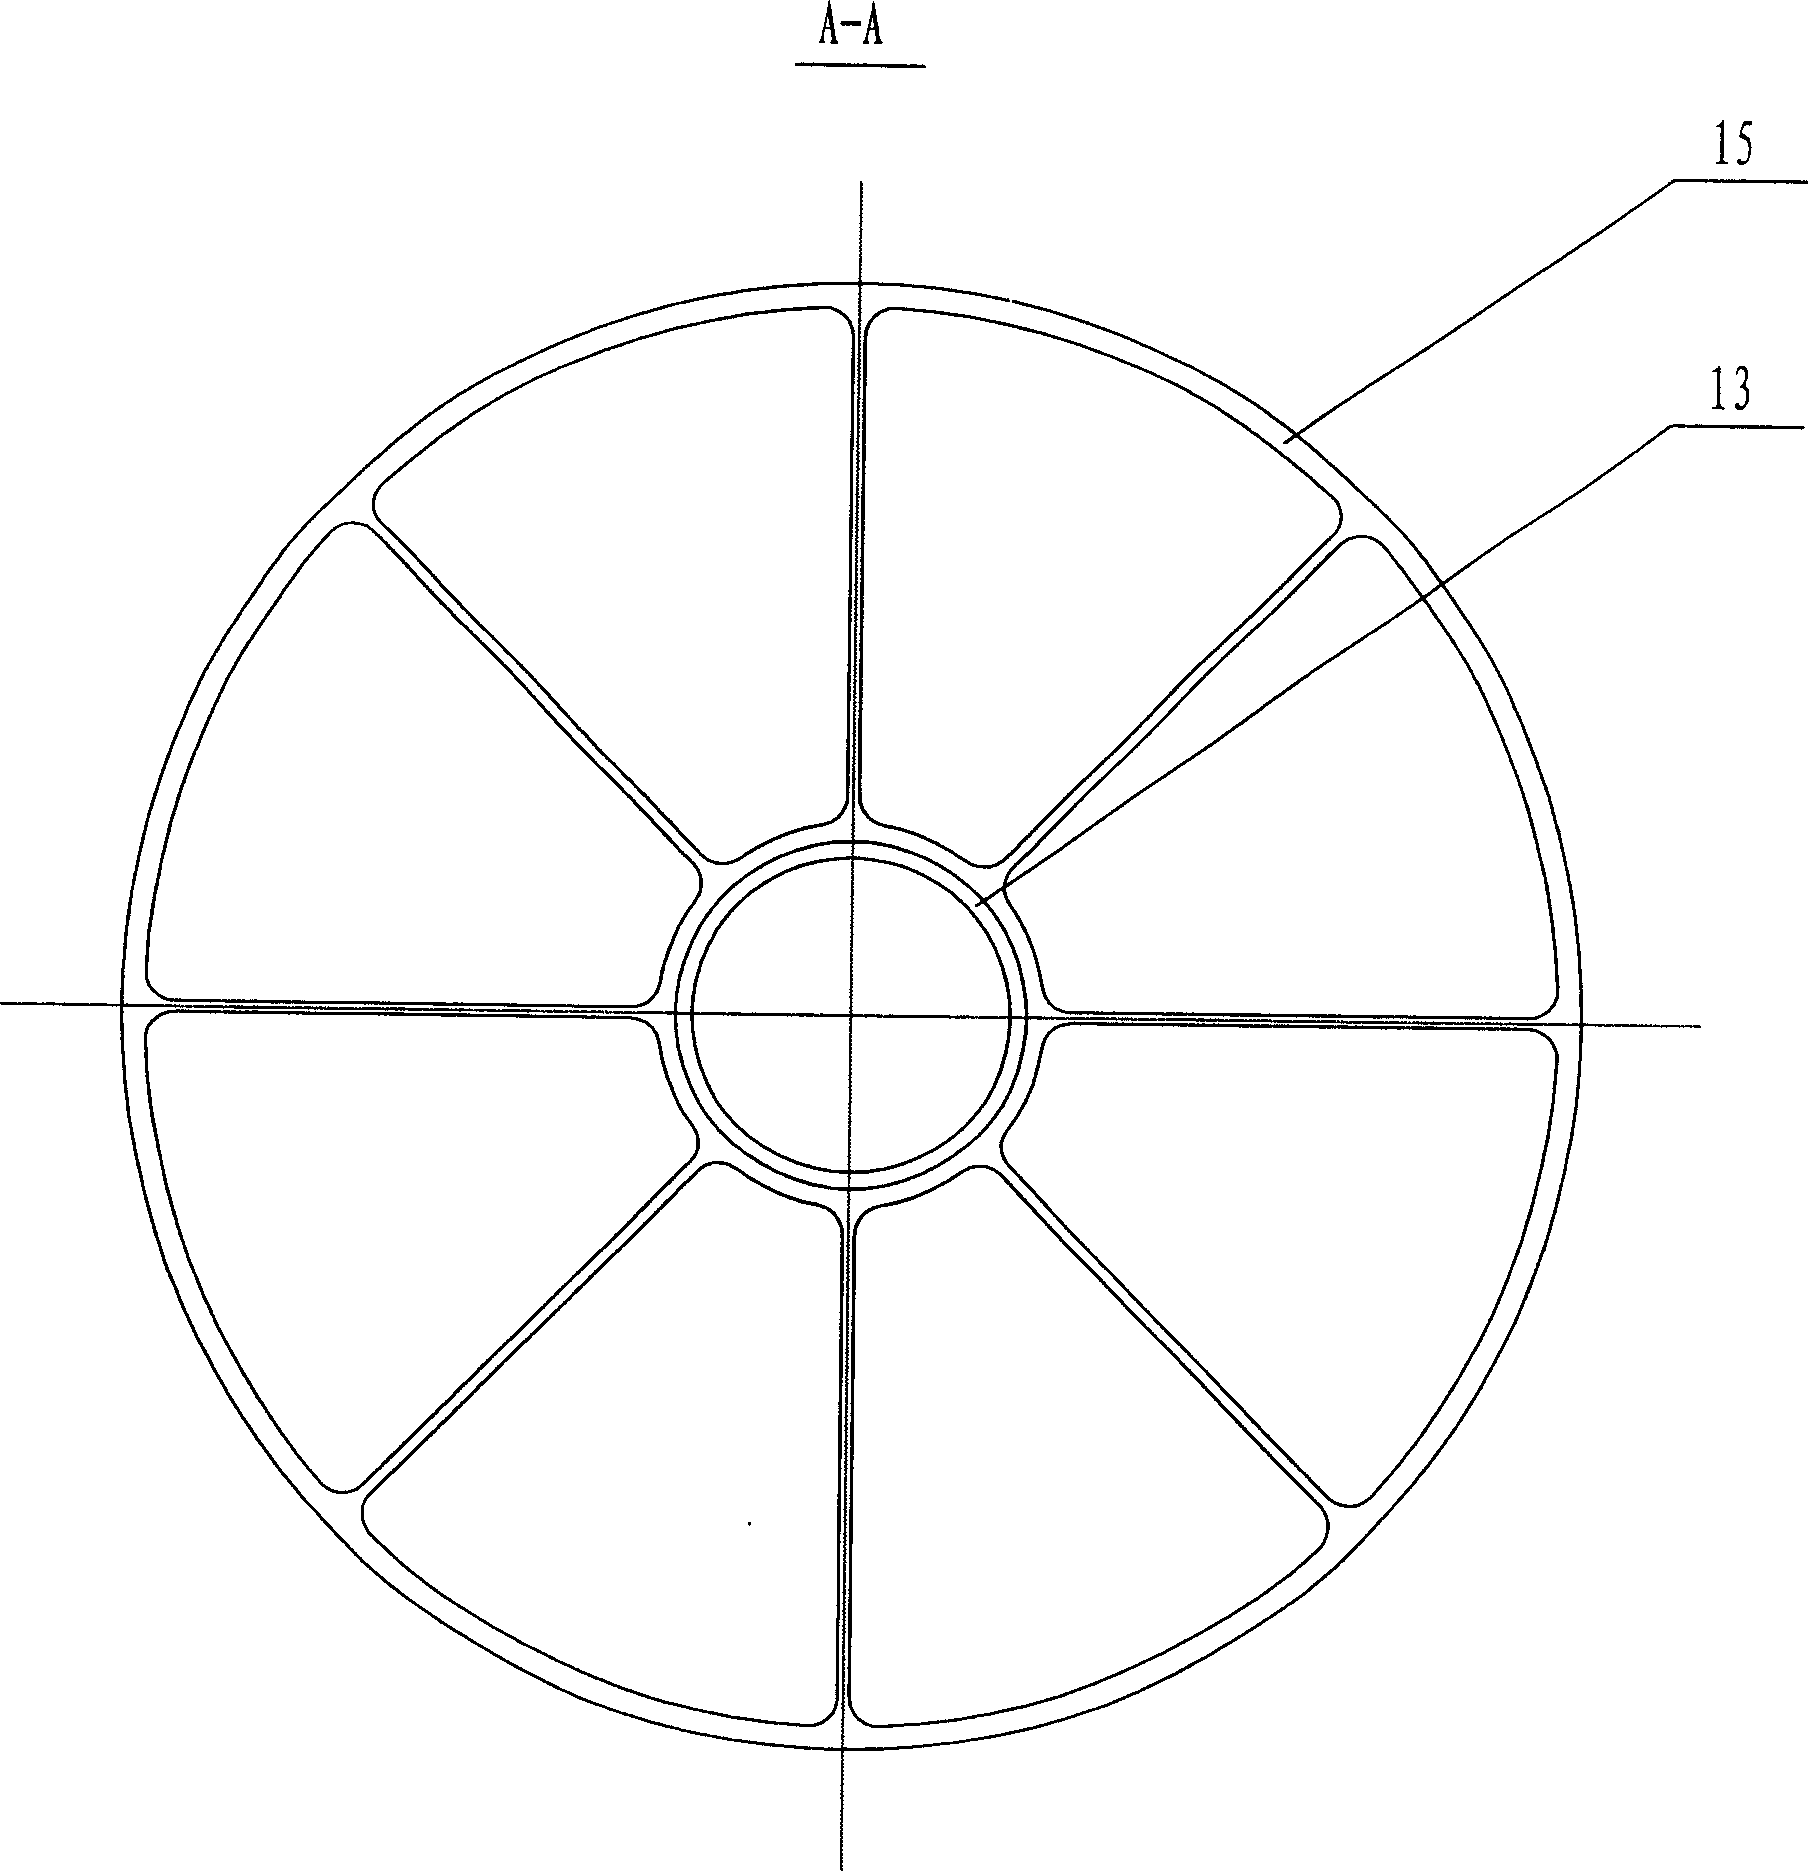 Blast furnace section ore-coke alternating multi-sector step distributing method, and its furnace top device